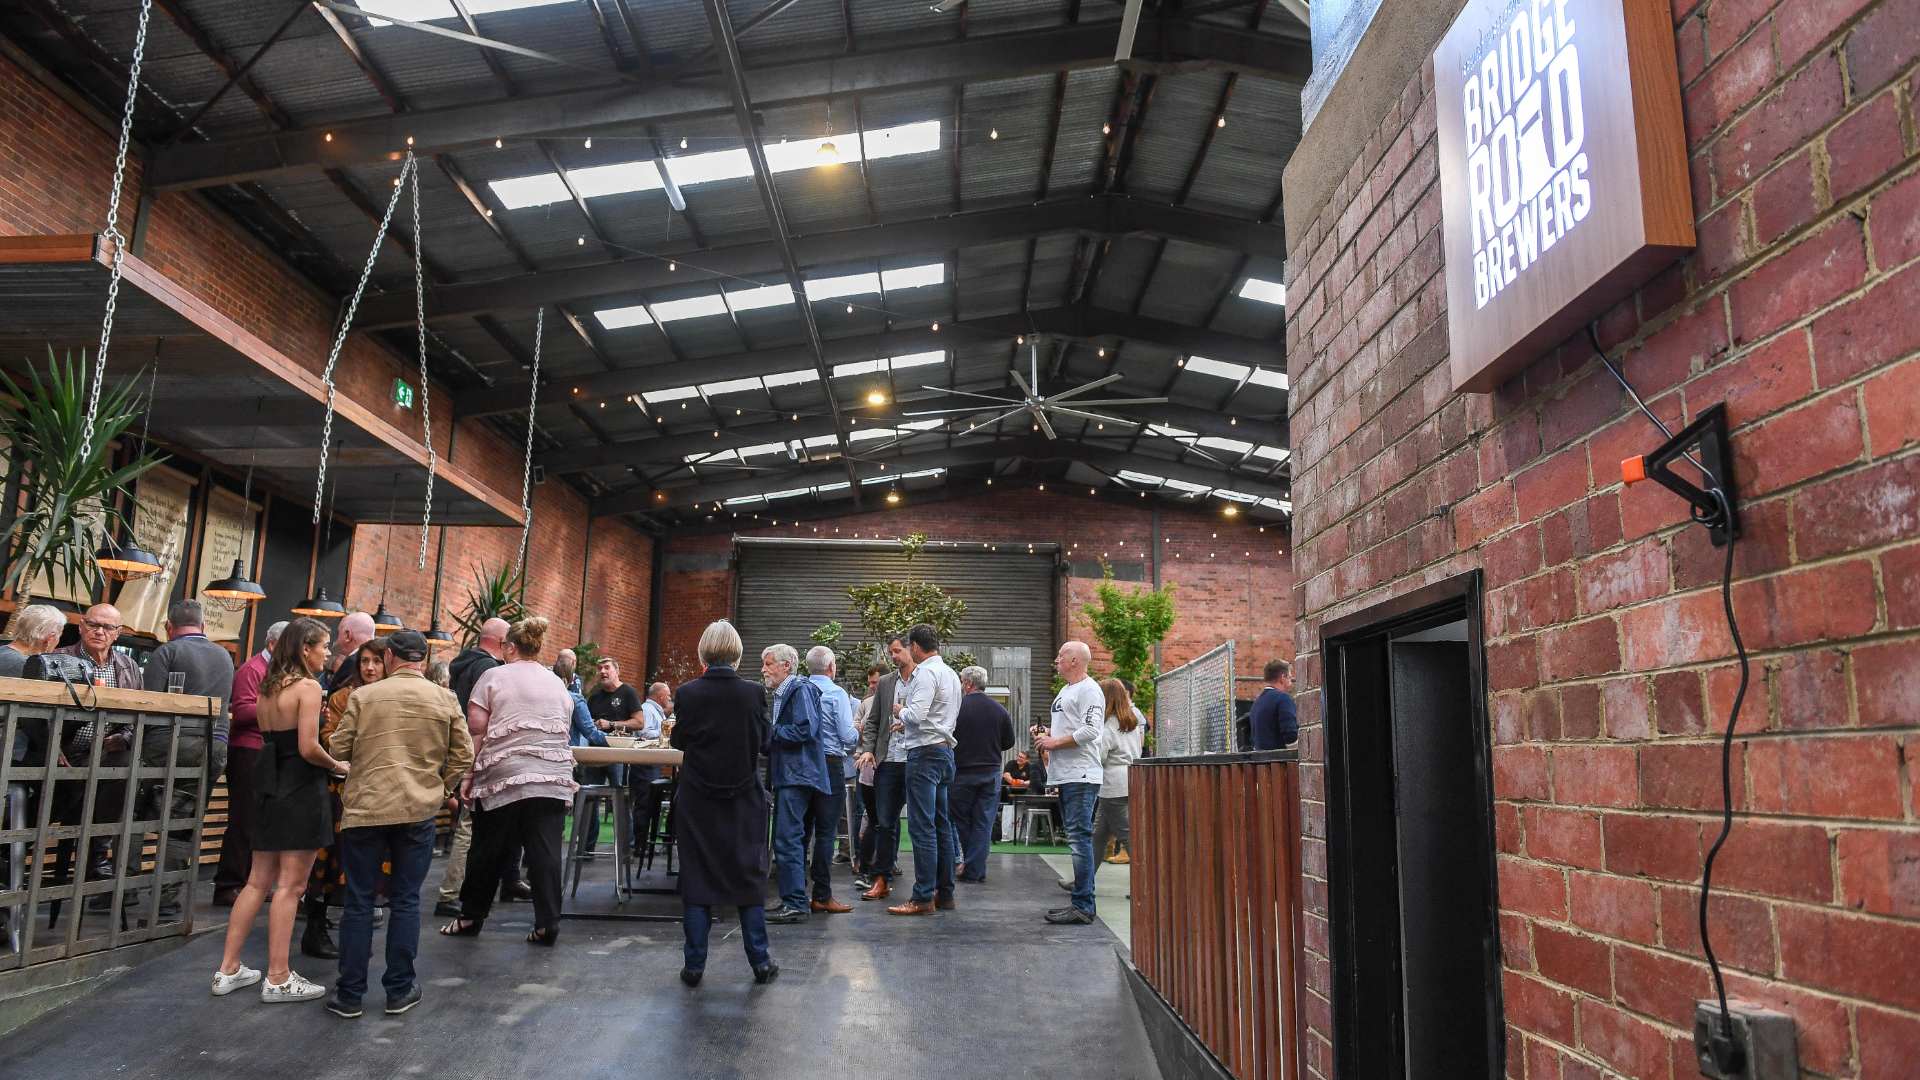 From the Collective Is Melbourne's New Beer Garden and Bottle Shop Celebrating Regional Victoria